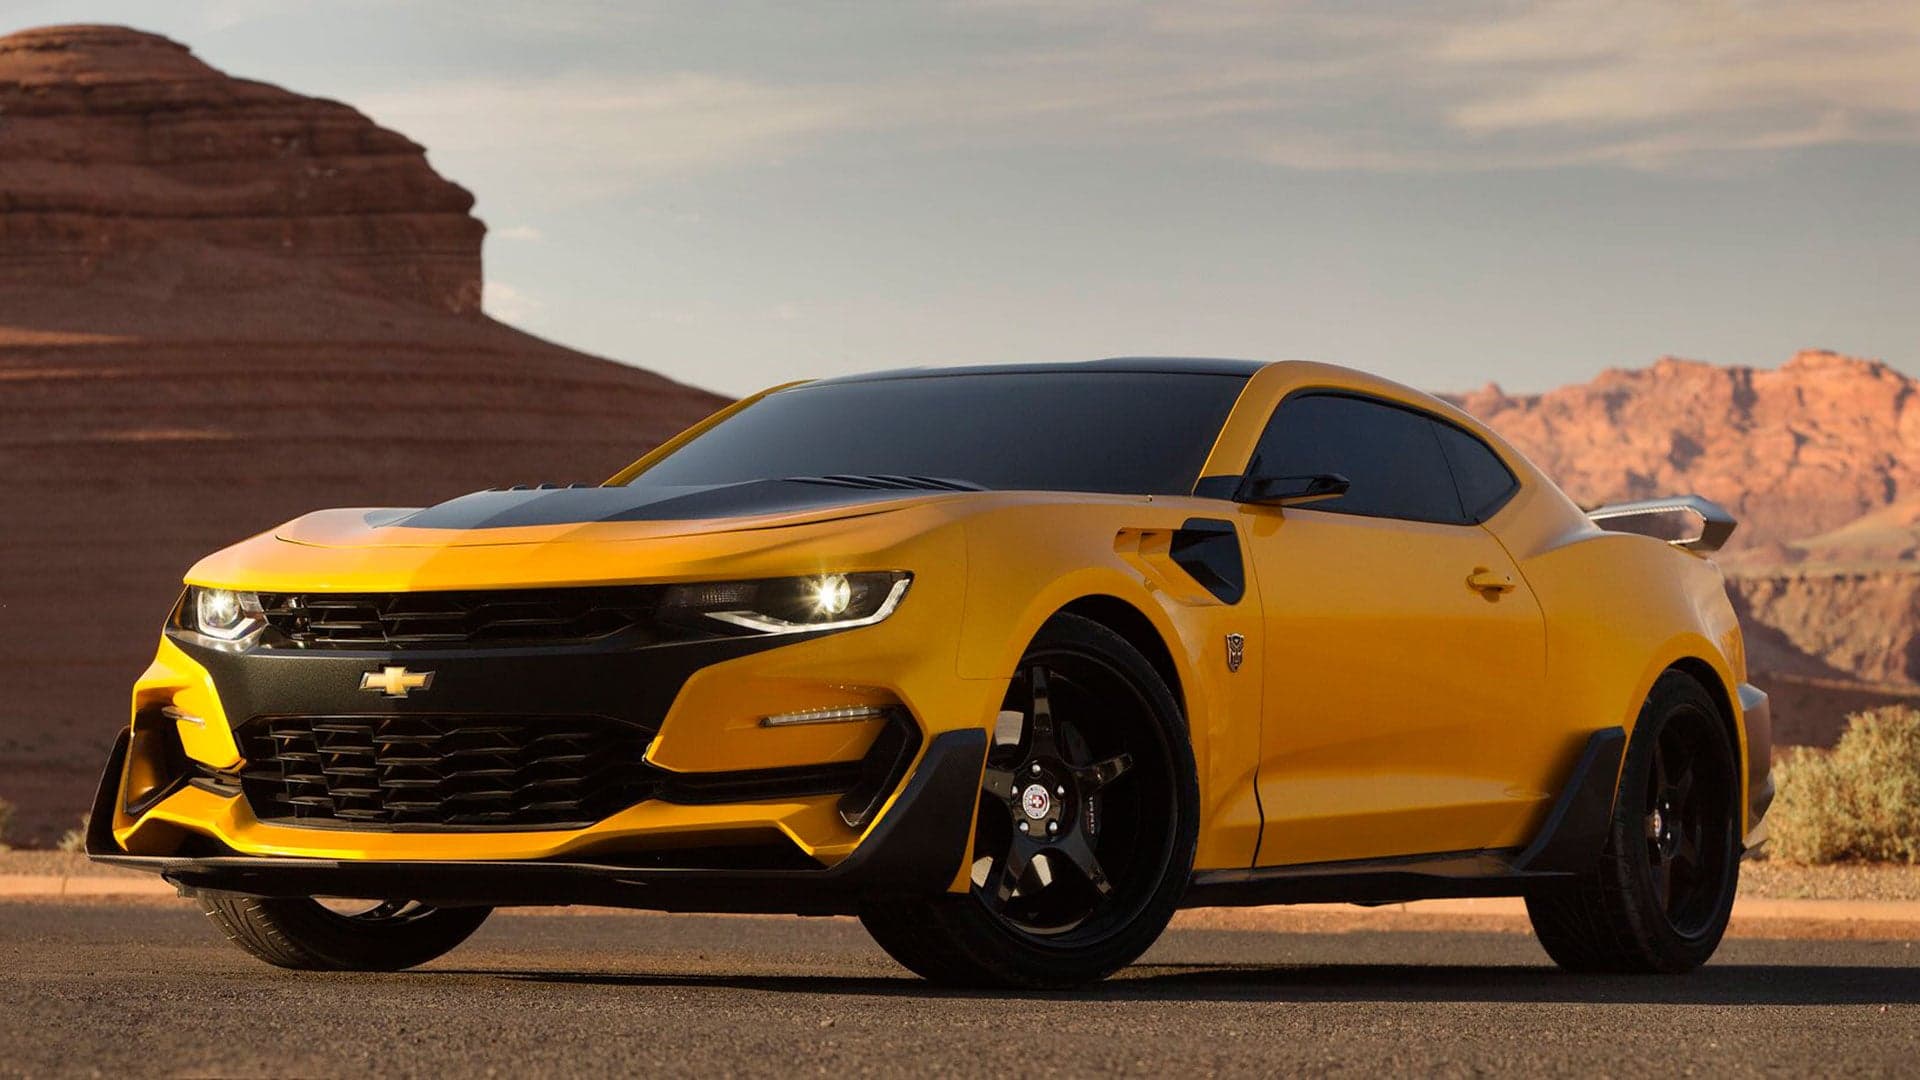 This Badass Chevrolet Camaro Is the New Transformers Bumblebee